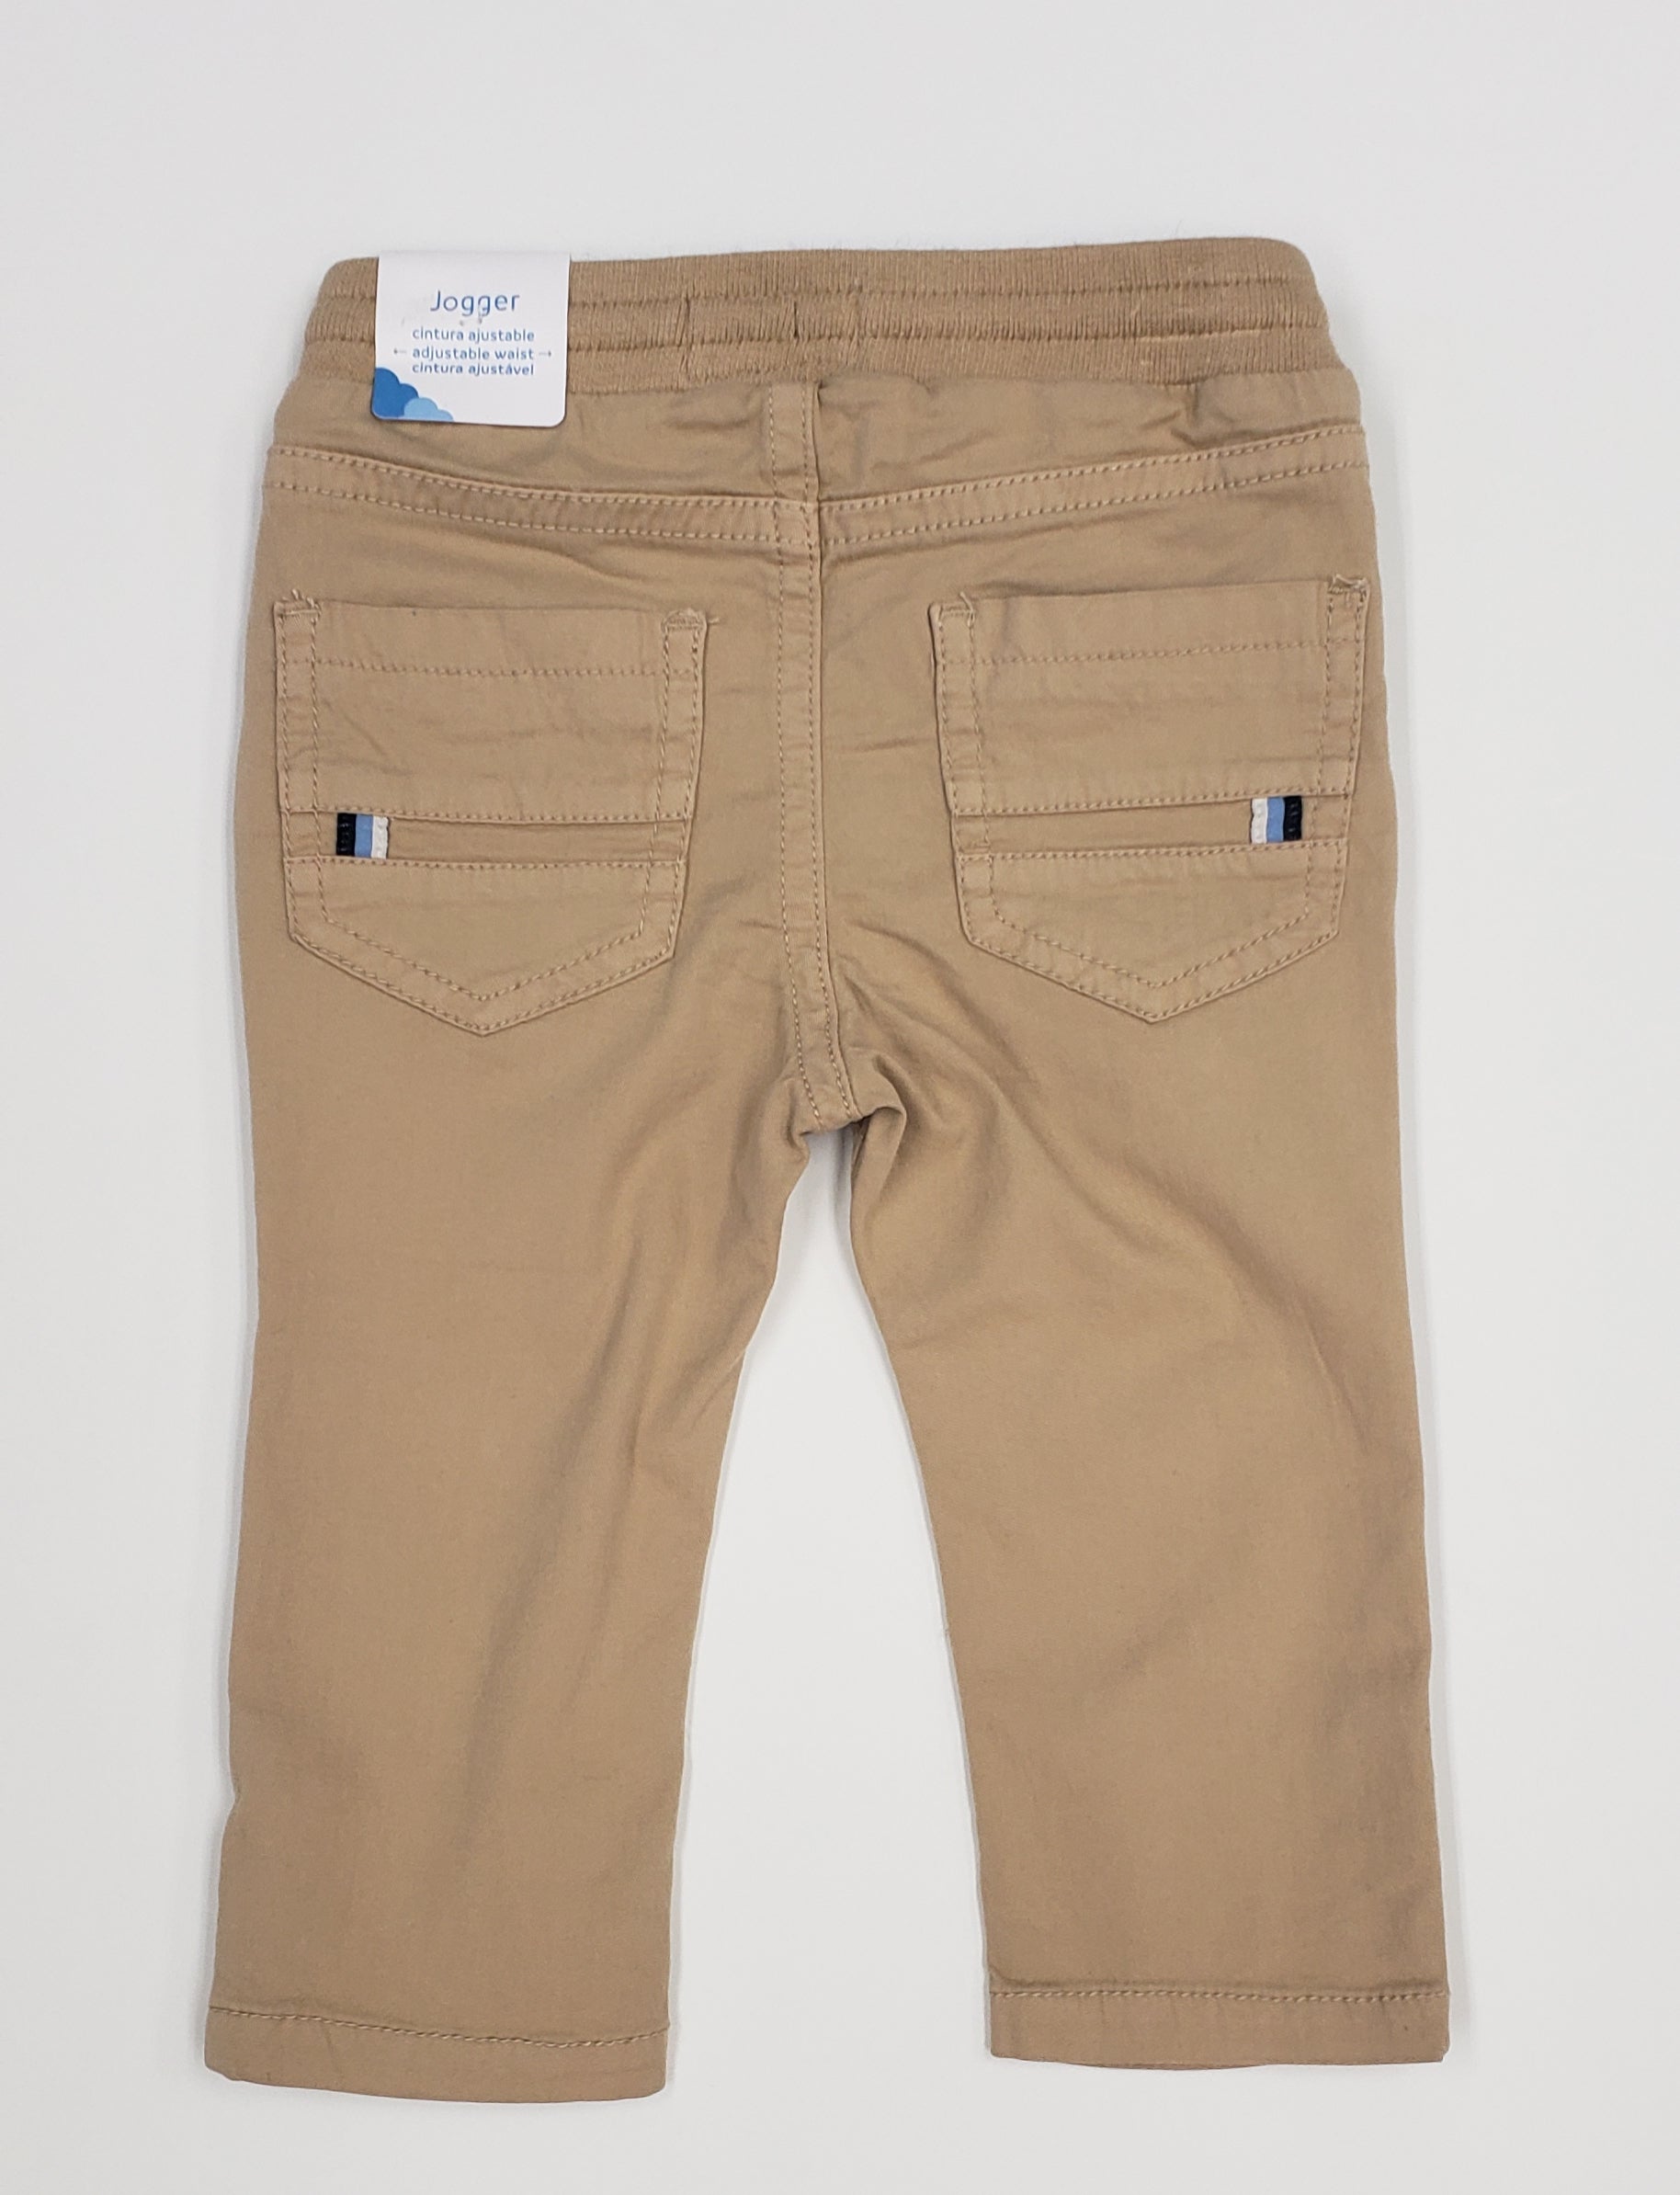 Baby Boy and Toddler Pant by Mayoral